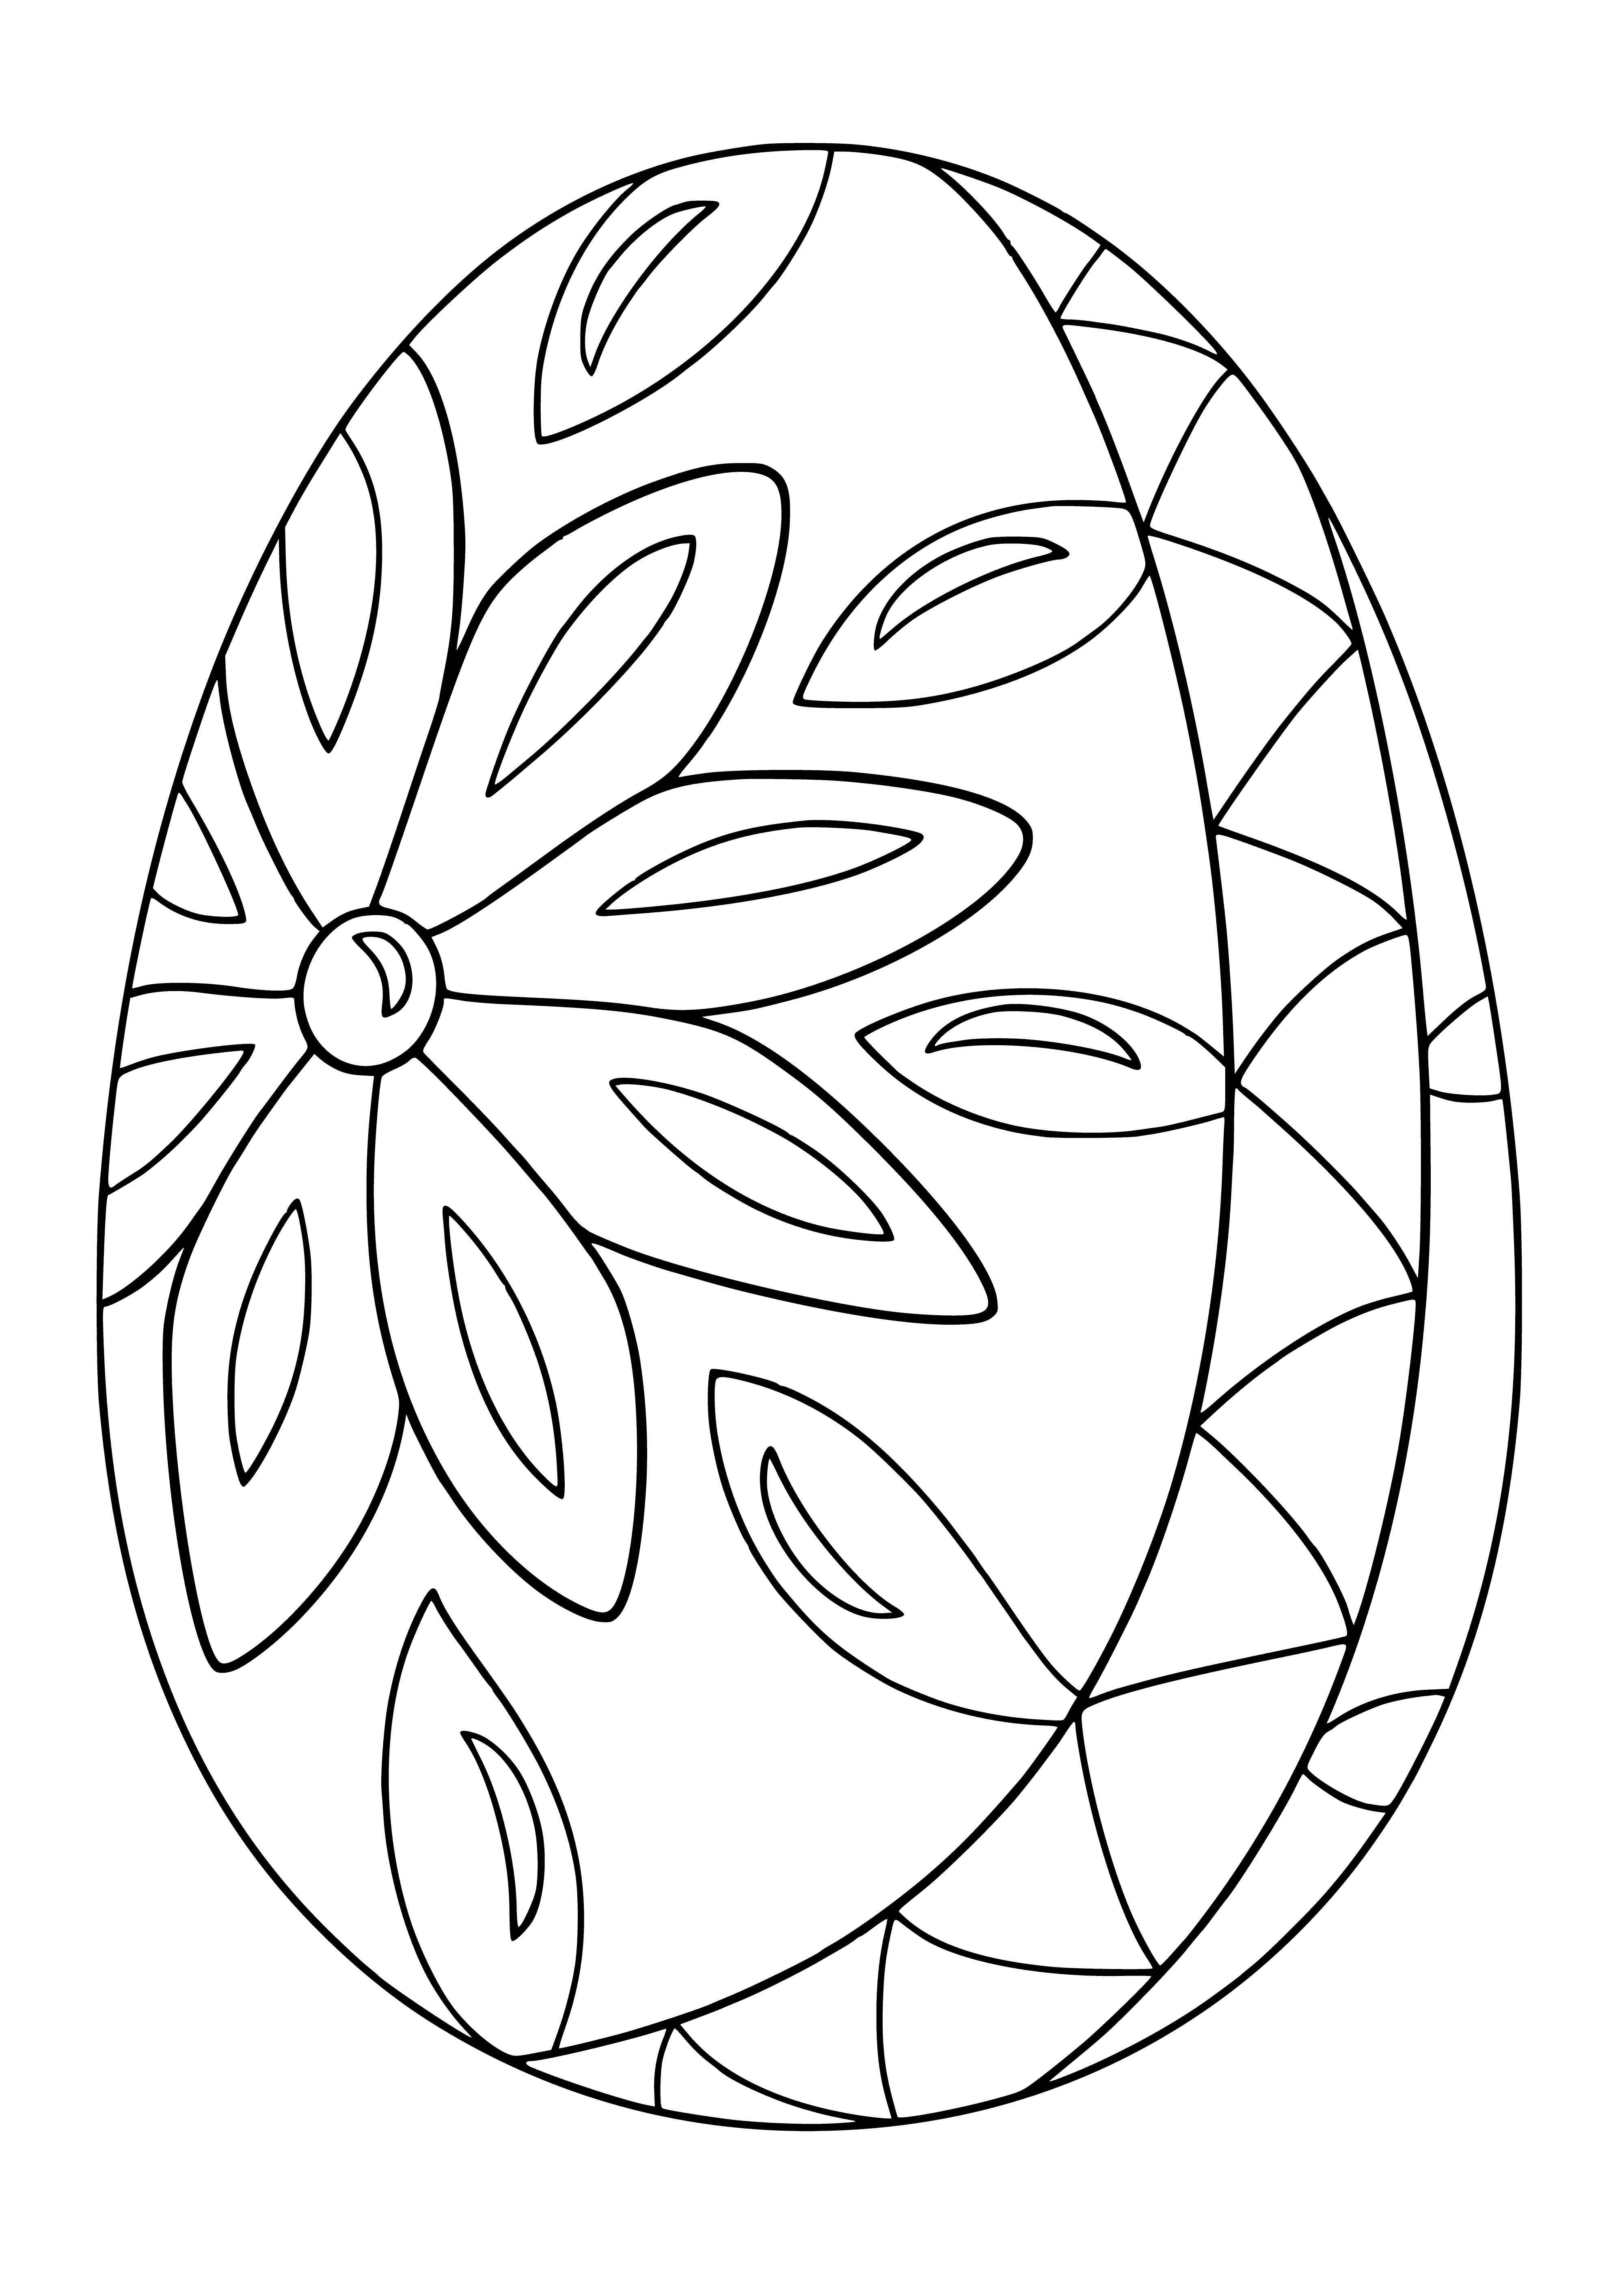 coloring page: 140 characters: 7 Easter eggs in coloring pg; 5 yellow, 1 green, 1 pink; all w/ diff. patterns: stripes, dots, checkered, & 2 flower designs.